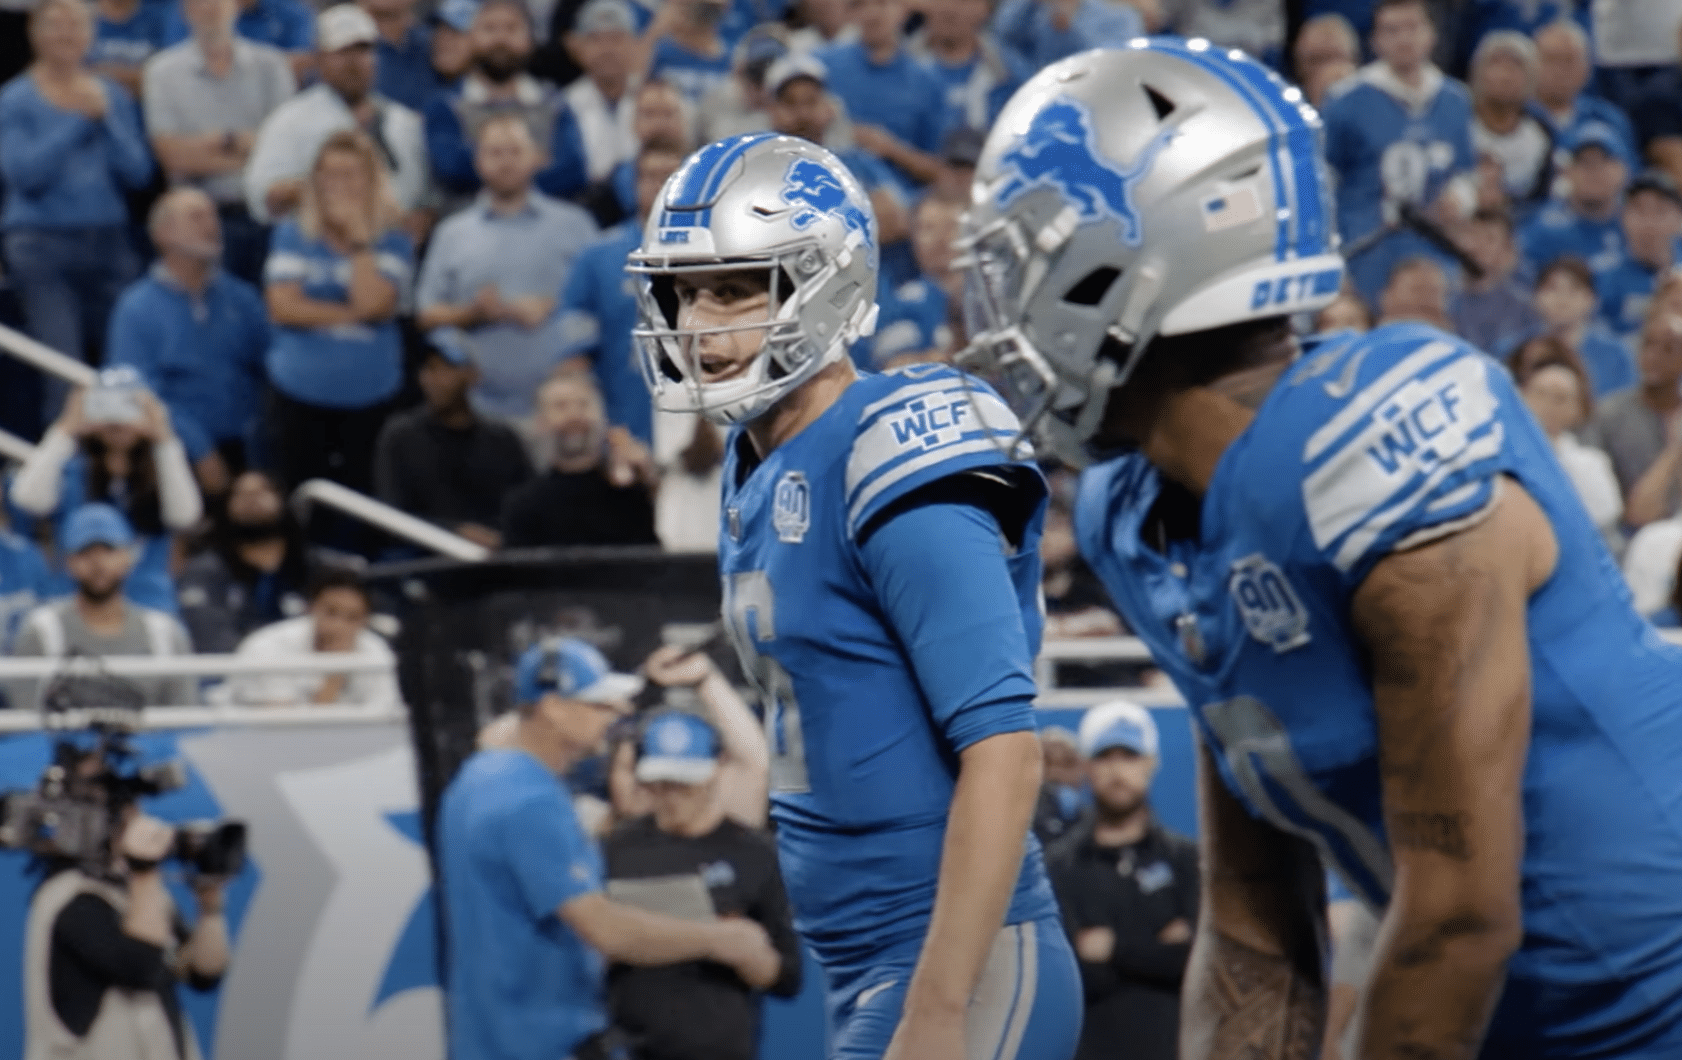 Detroit Lions starting offense Is Jared Goff An MVP Candidate Detroit Lions PFF Grades vs. Raiders Jared Goff may have to wait Update: Jared Goff Contract Extension Talks With Detroit Lions Should the Detroit Lions Rest Their Starters Agent of Jared Goff Detroit Lions PFF Grades vs. Rams